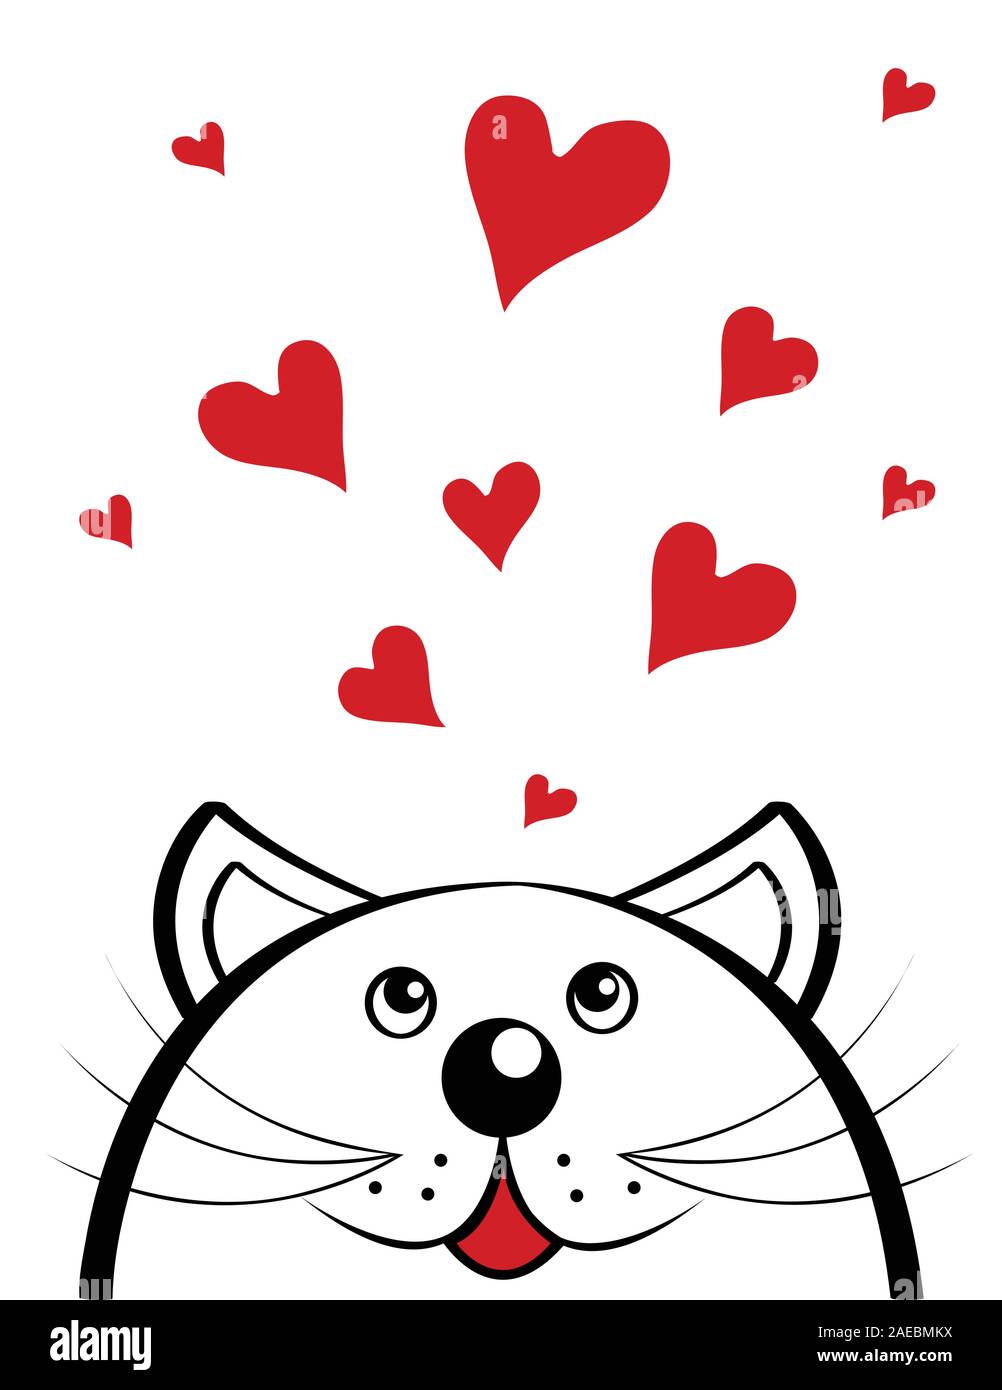 Cat Lover Heart Stock Vector Illustration and Royalty Free Cat Lover Heart  Clipart